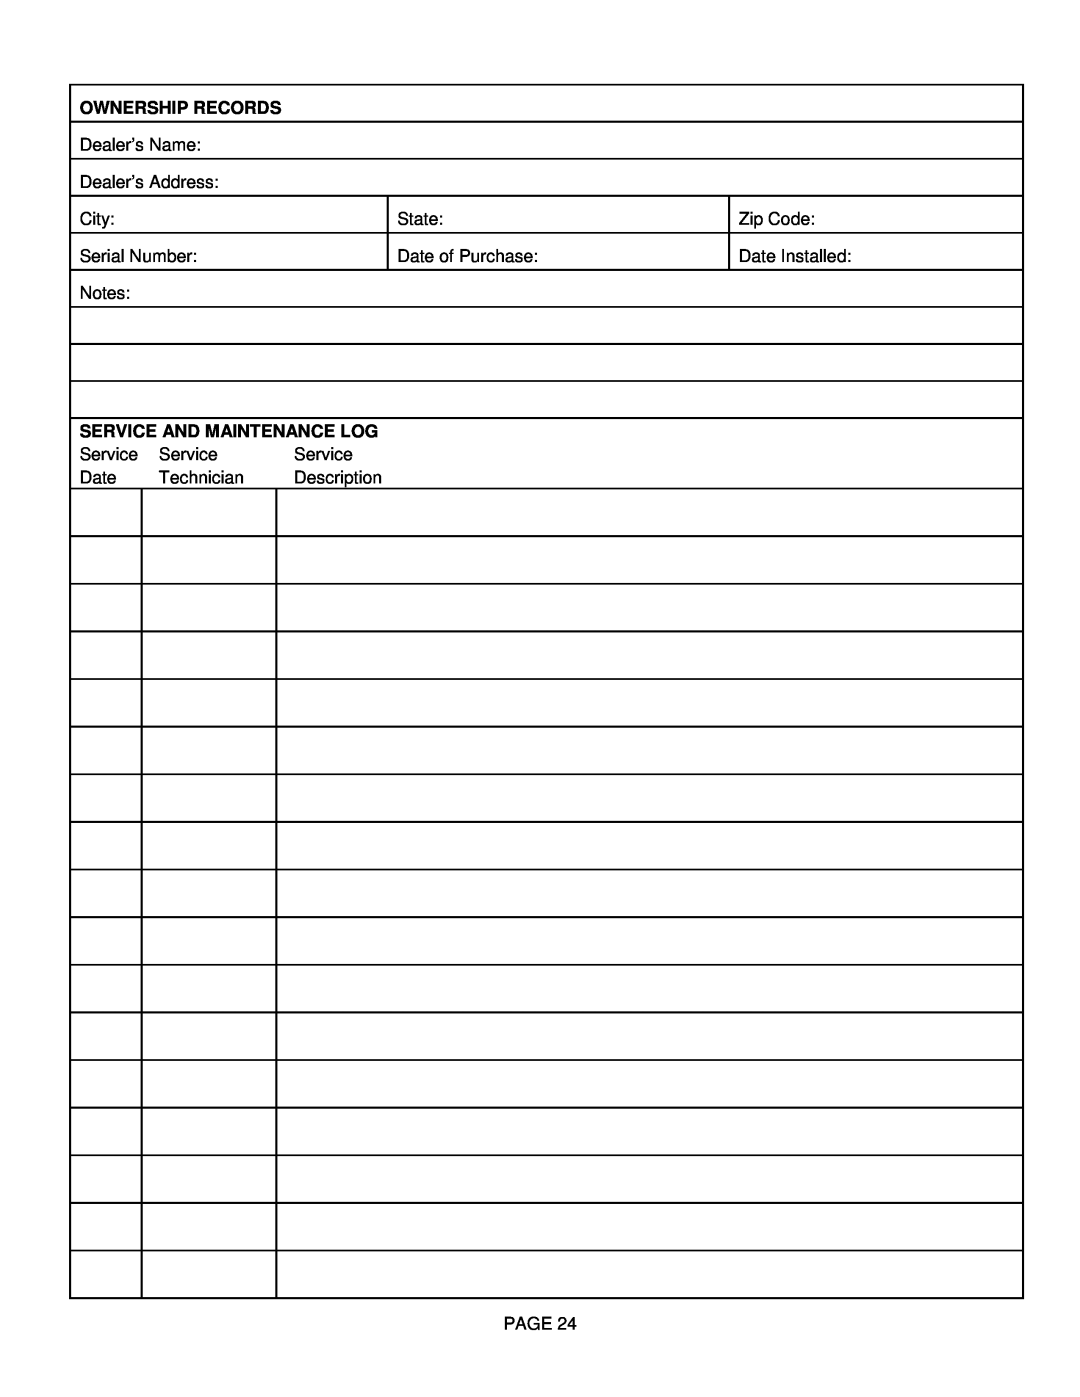 Lenoxx Electronics L30 BF-2 operation manual Ownership Records, Service And Maintenance Log 